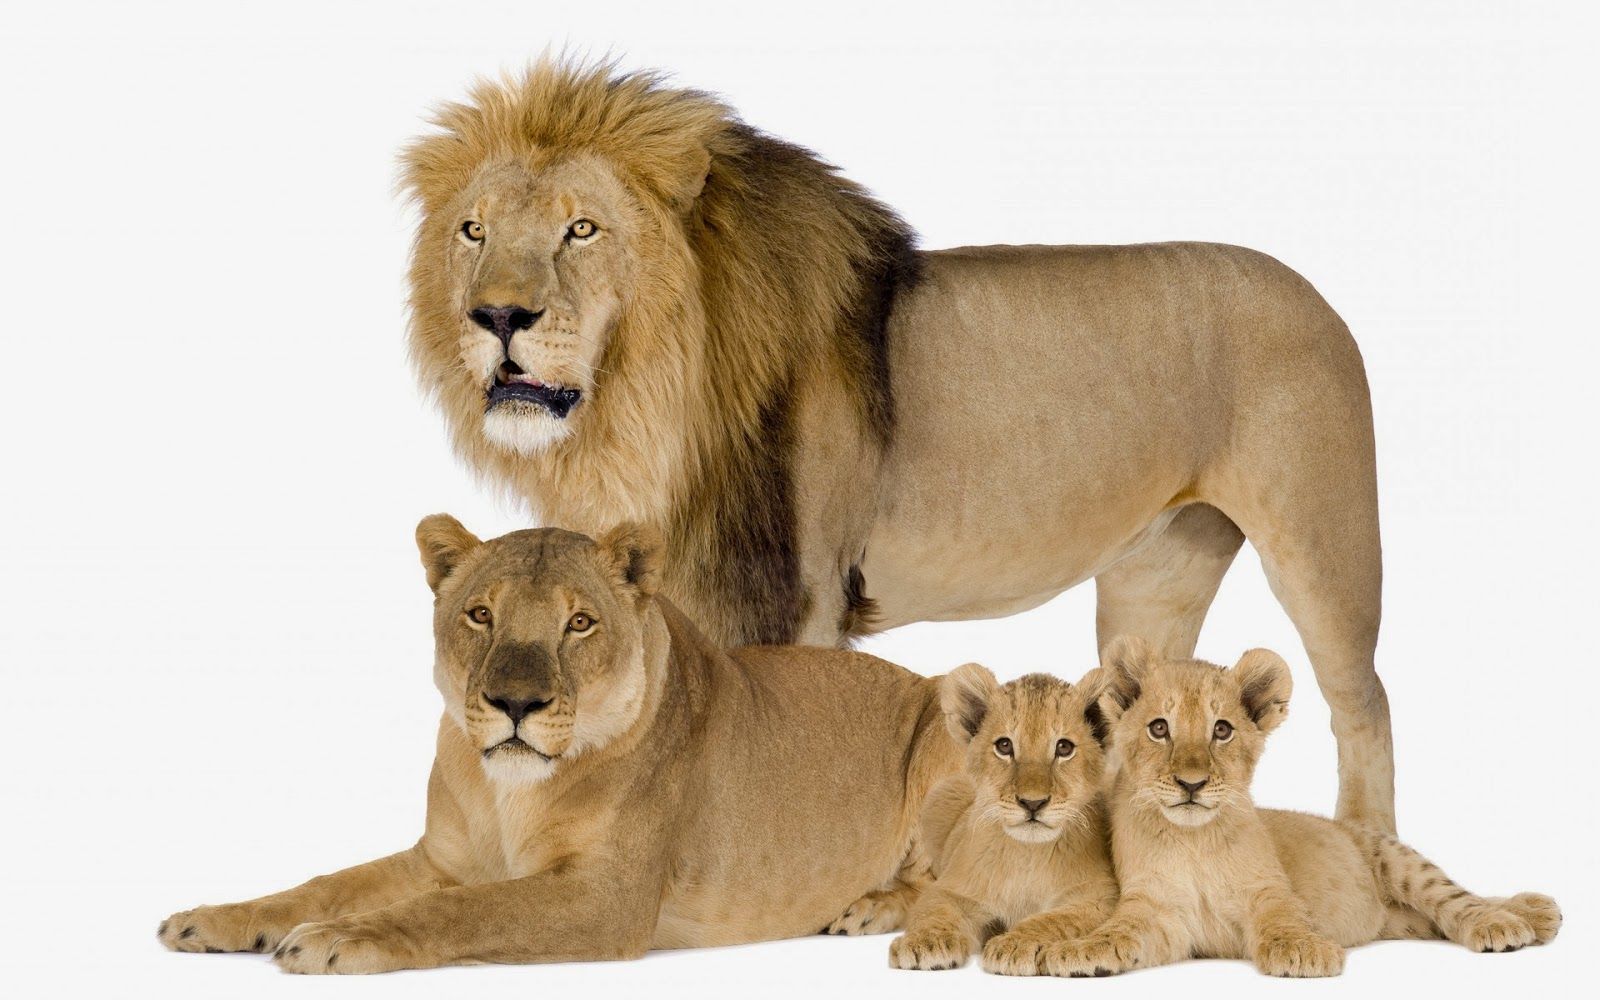 HD Lions Wallpaper and Photo. Lion family, Lion, Lion facts